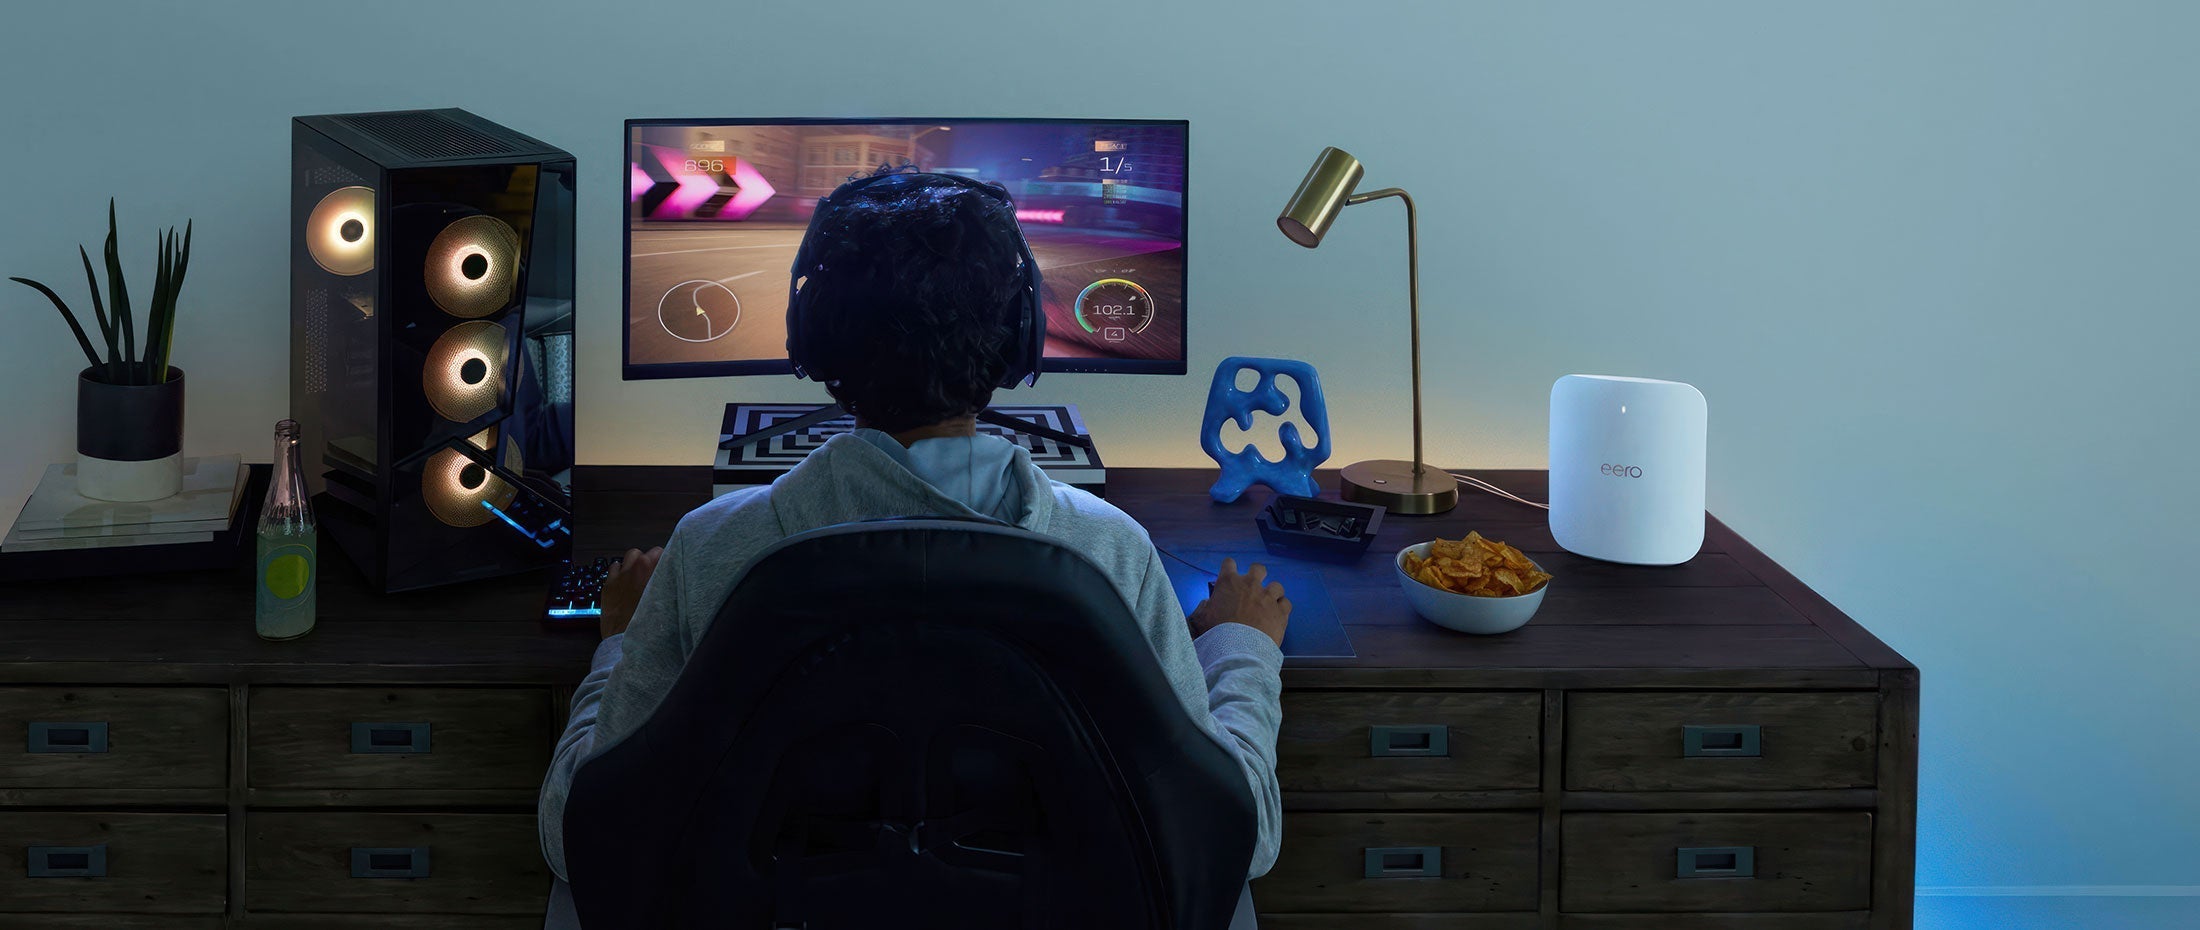 A boy playing video games at his desk.